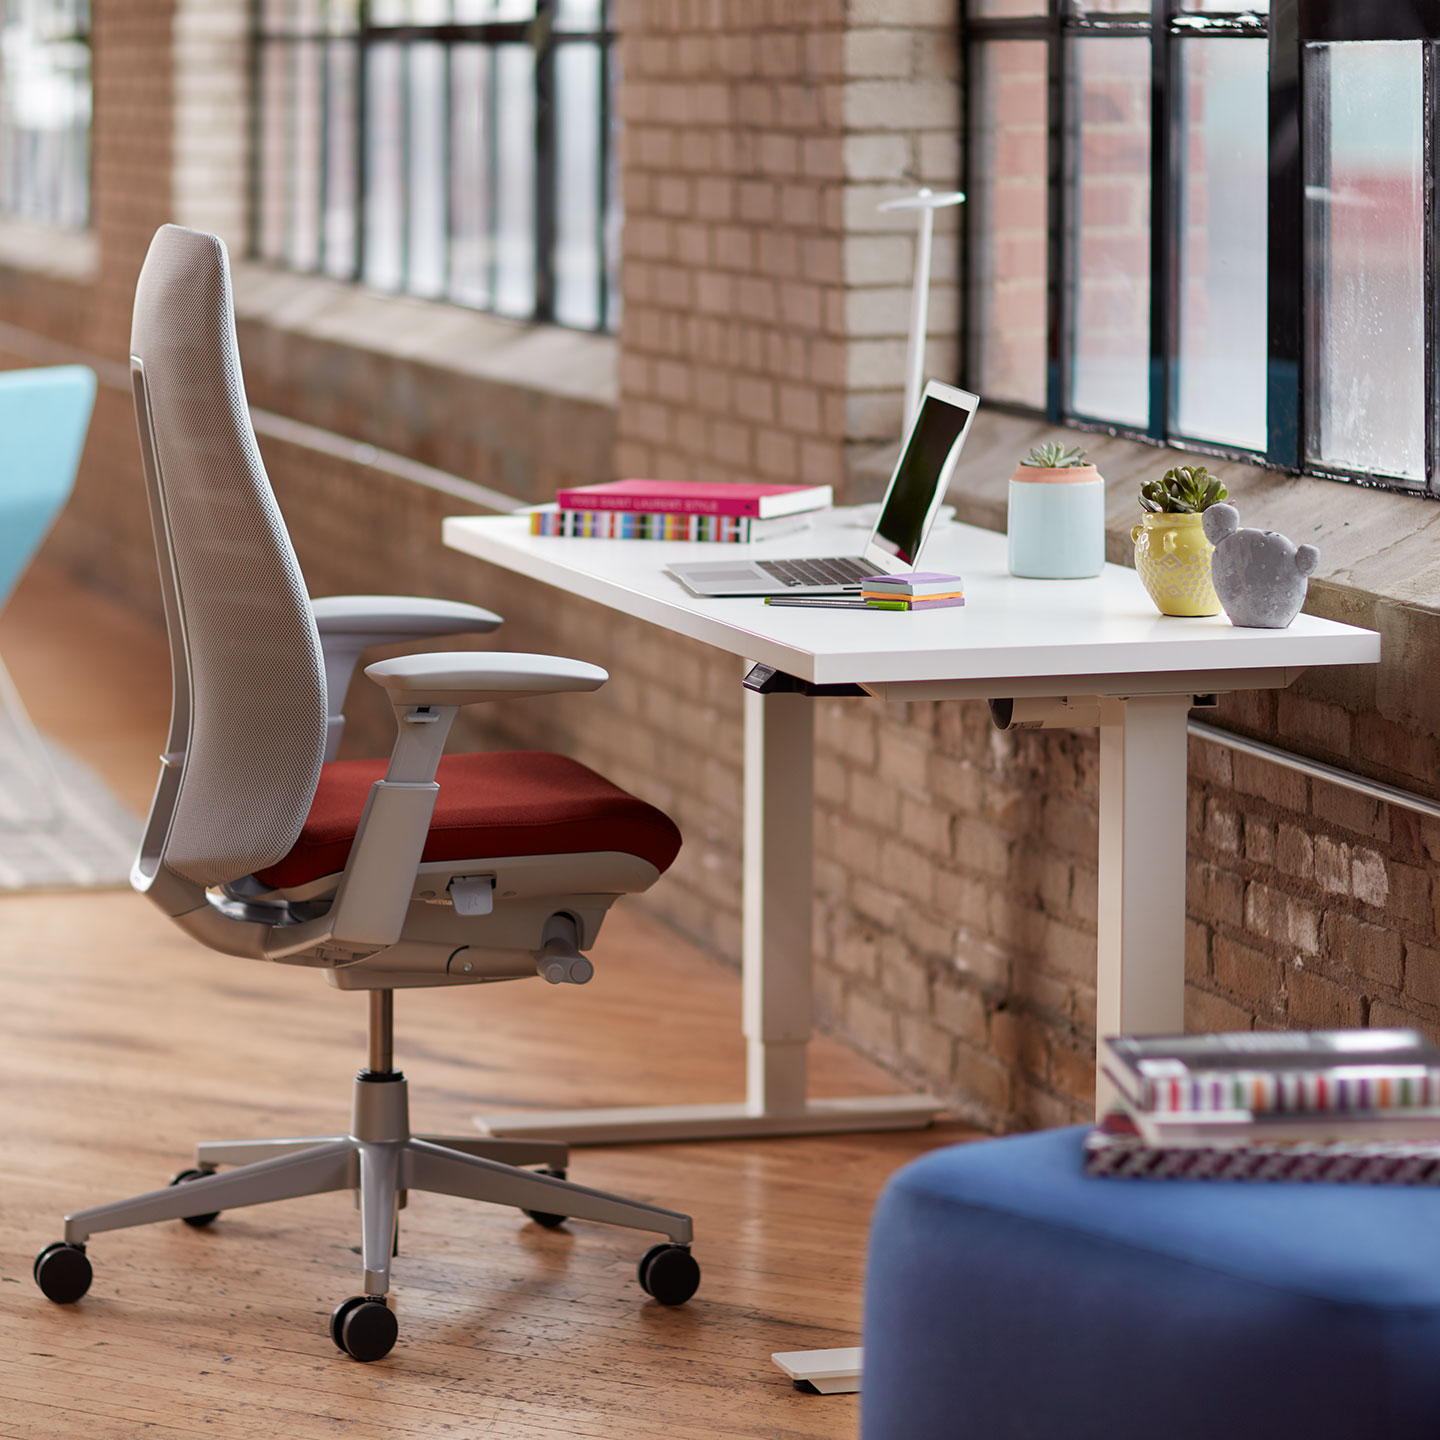 Haworth Height Adjustable Table being used as a small desk with Fern Seating in a open office space with windows